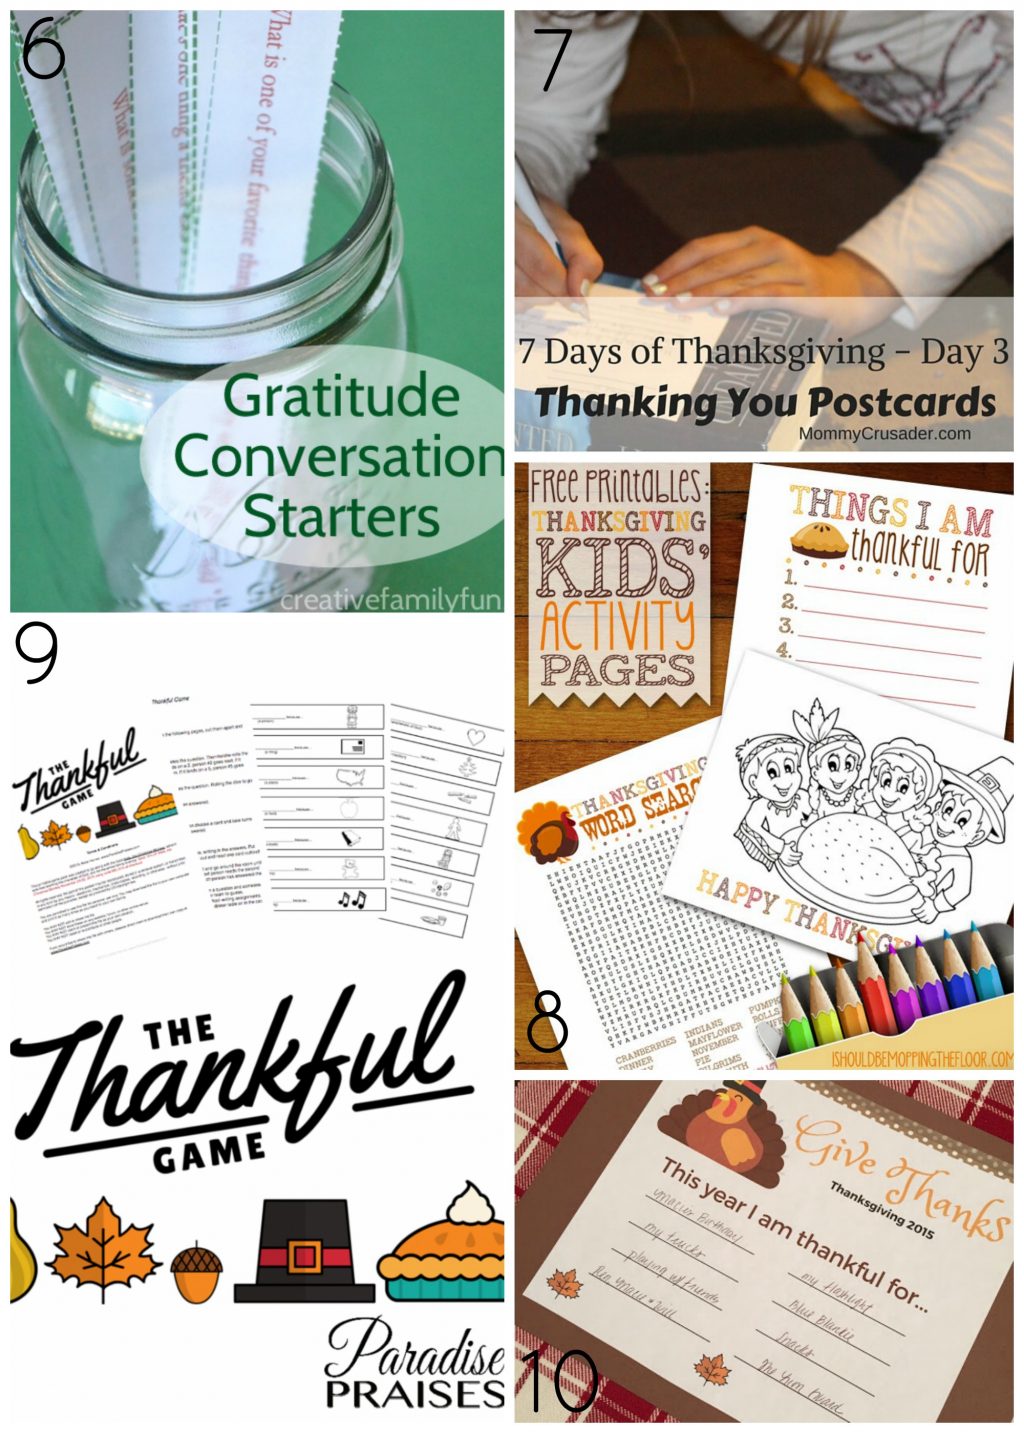 Top 10 Kids Projects to Give Thanks